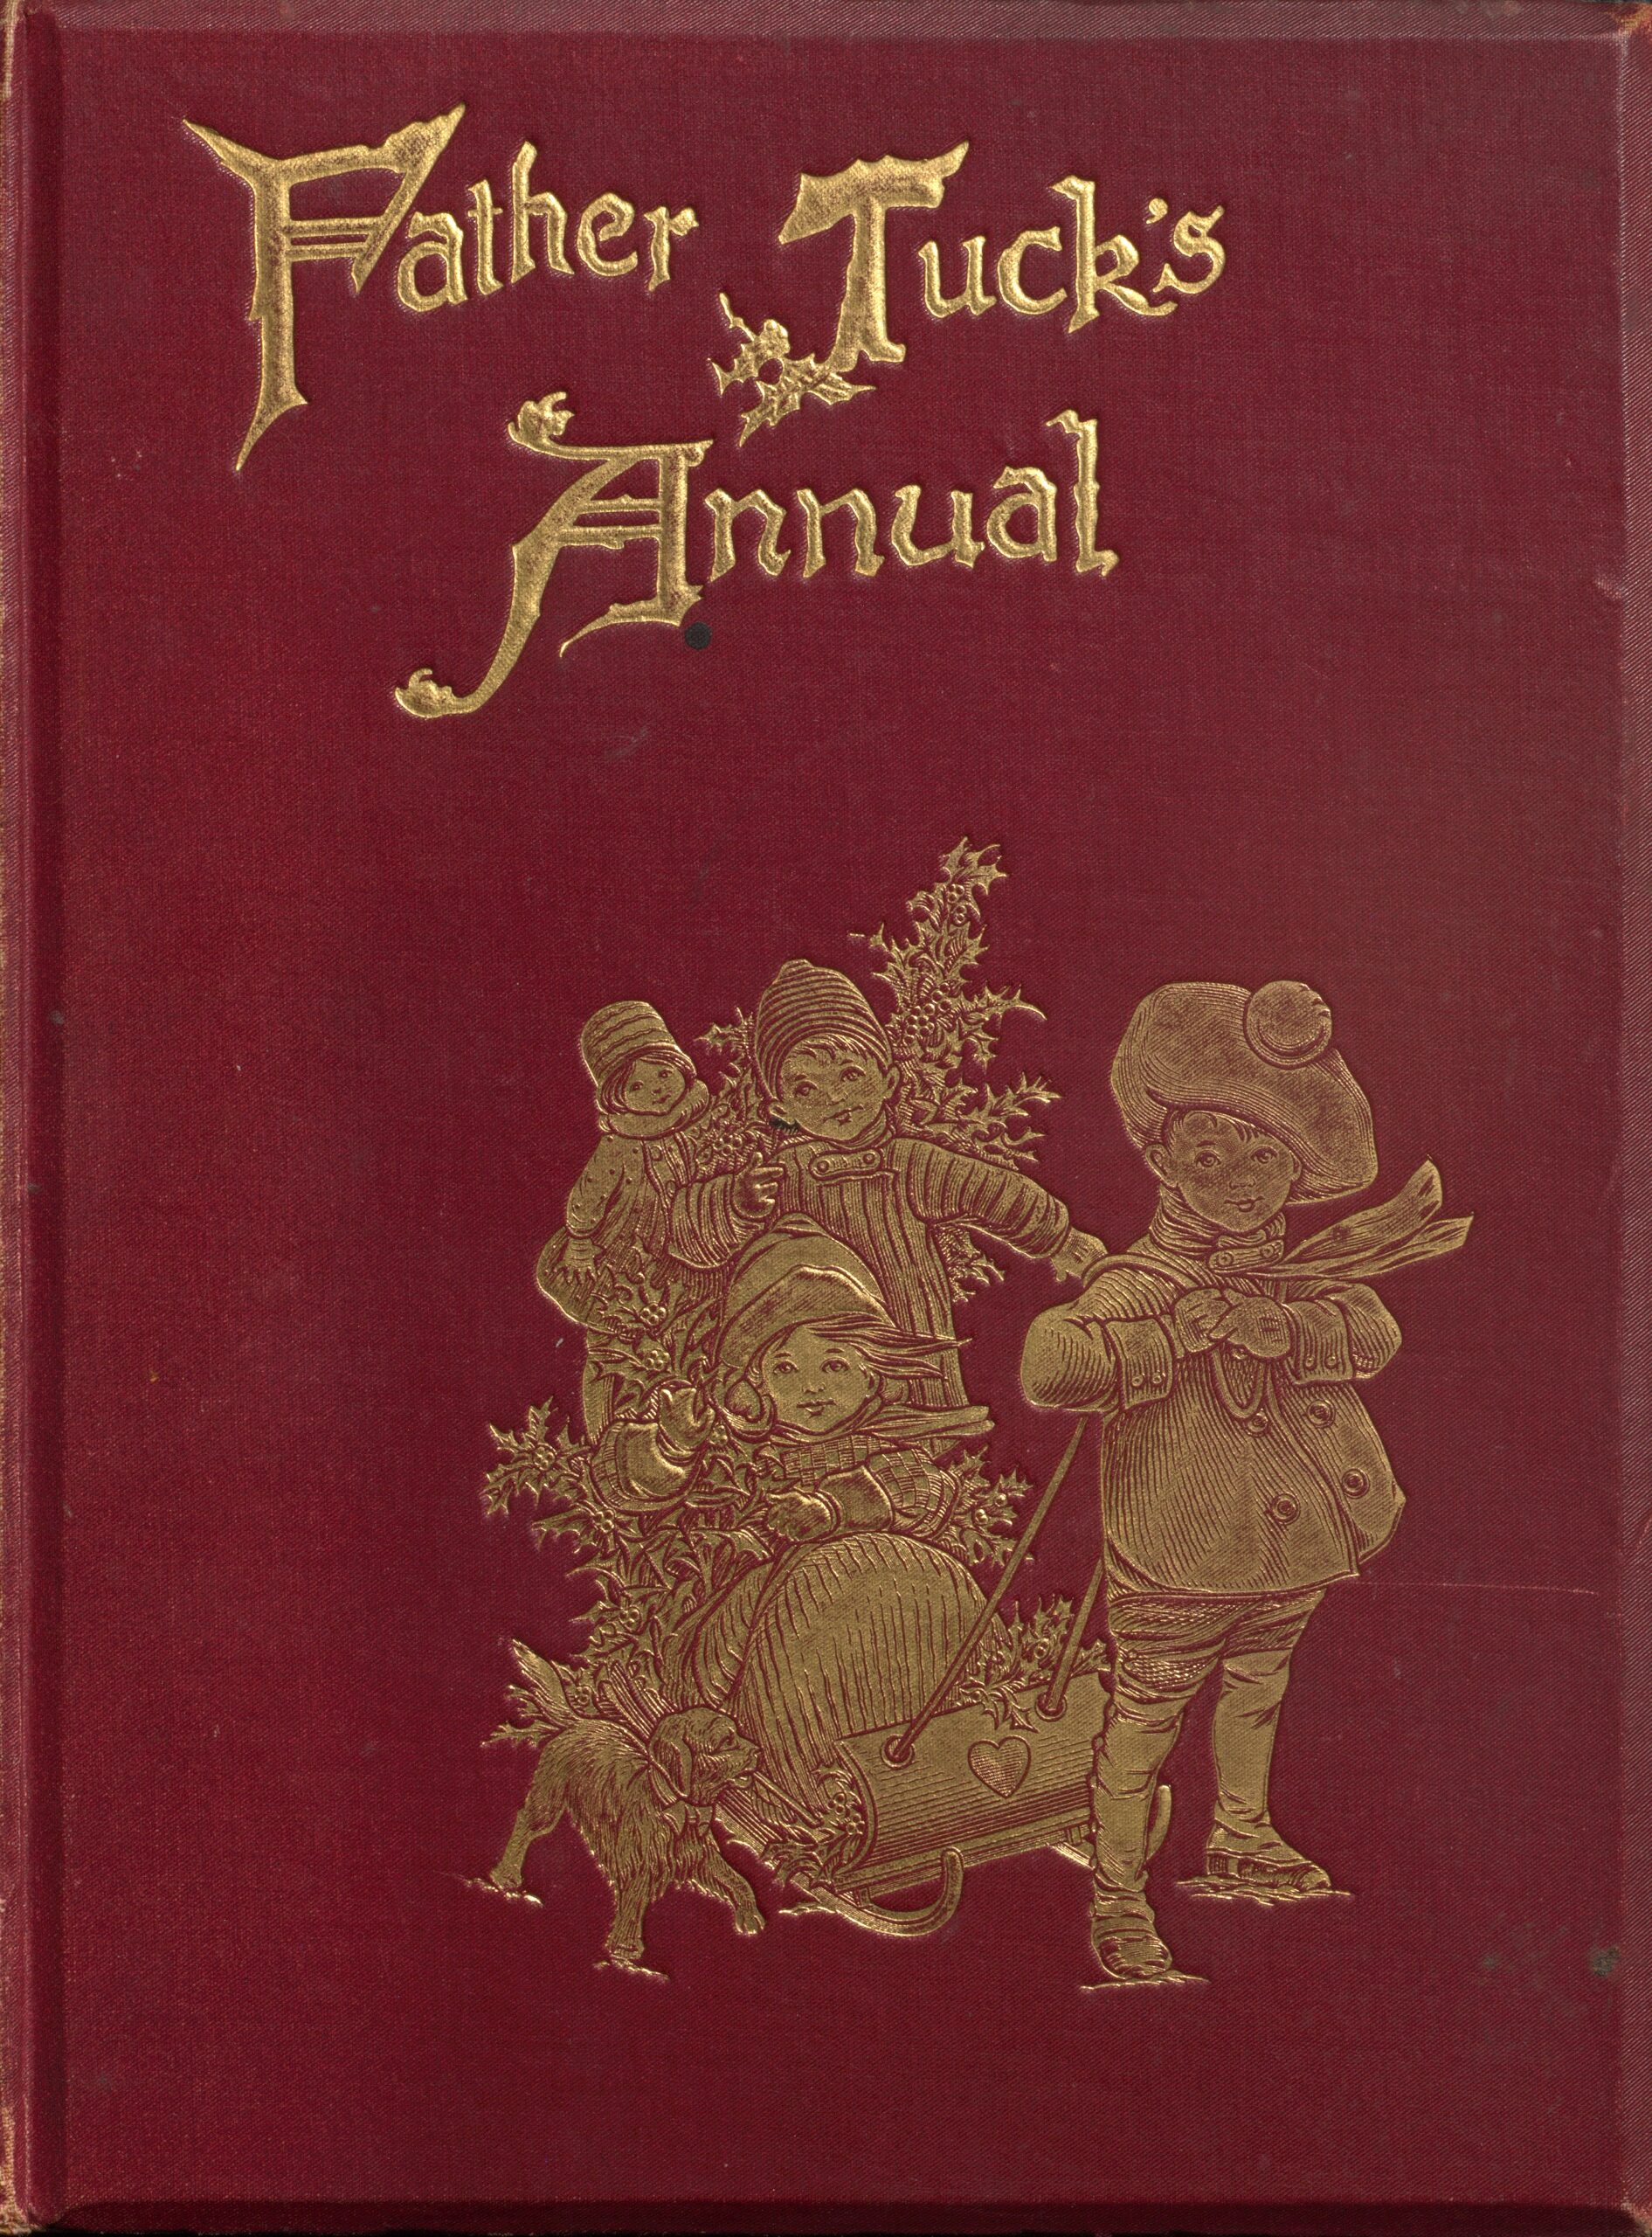 Father tuck's annual in gold on maroon book cover